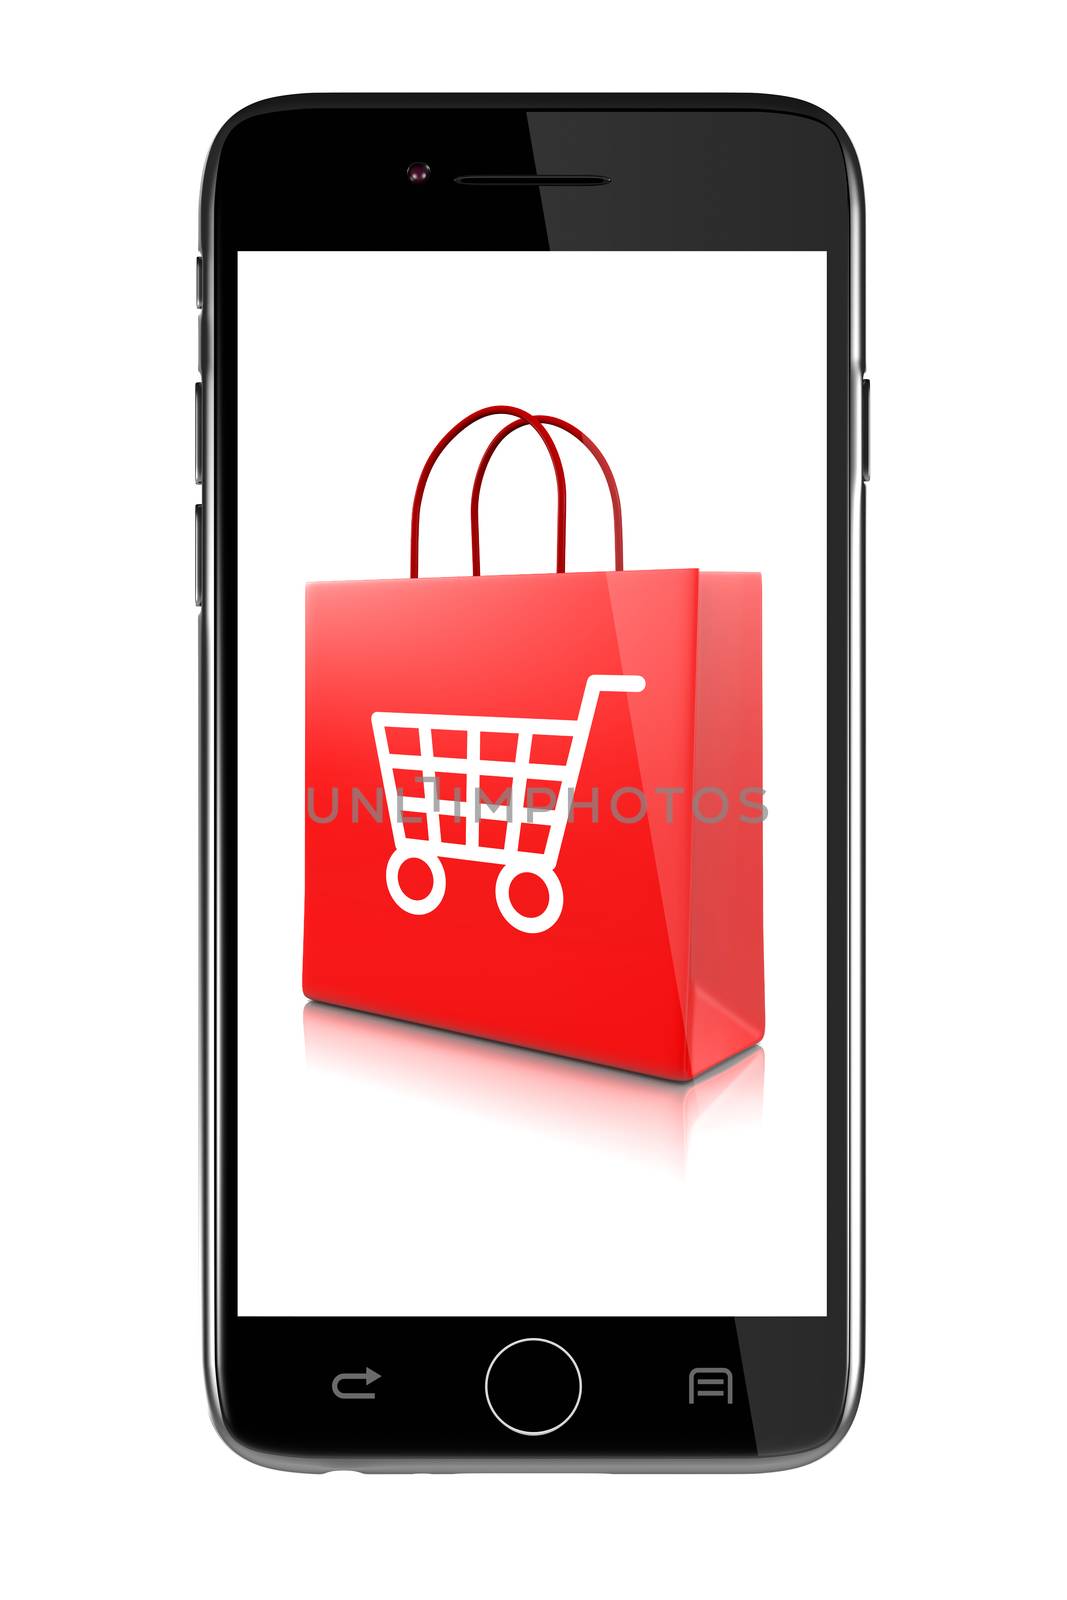 Smartphone Showing Shopping Bags with Shopping Cart Symbol Isolated on White Background Illustration, Online Discount Concept